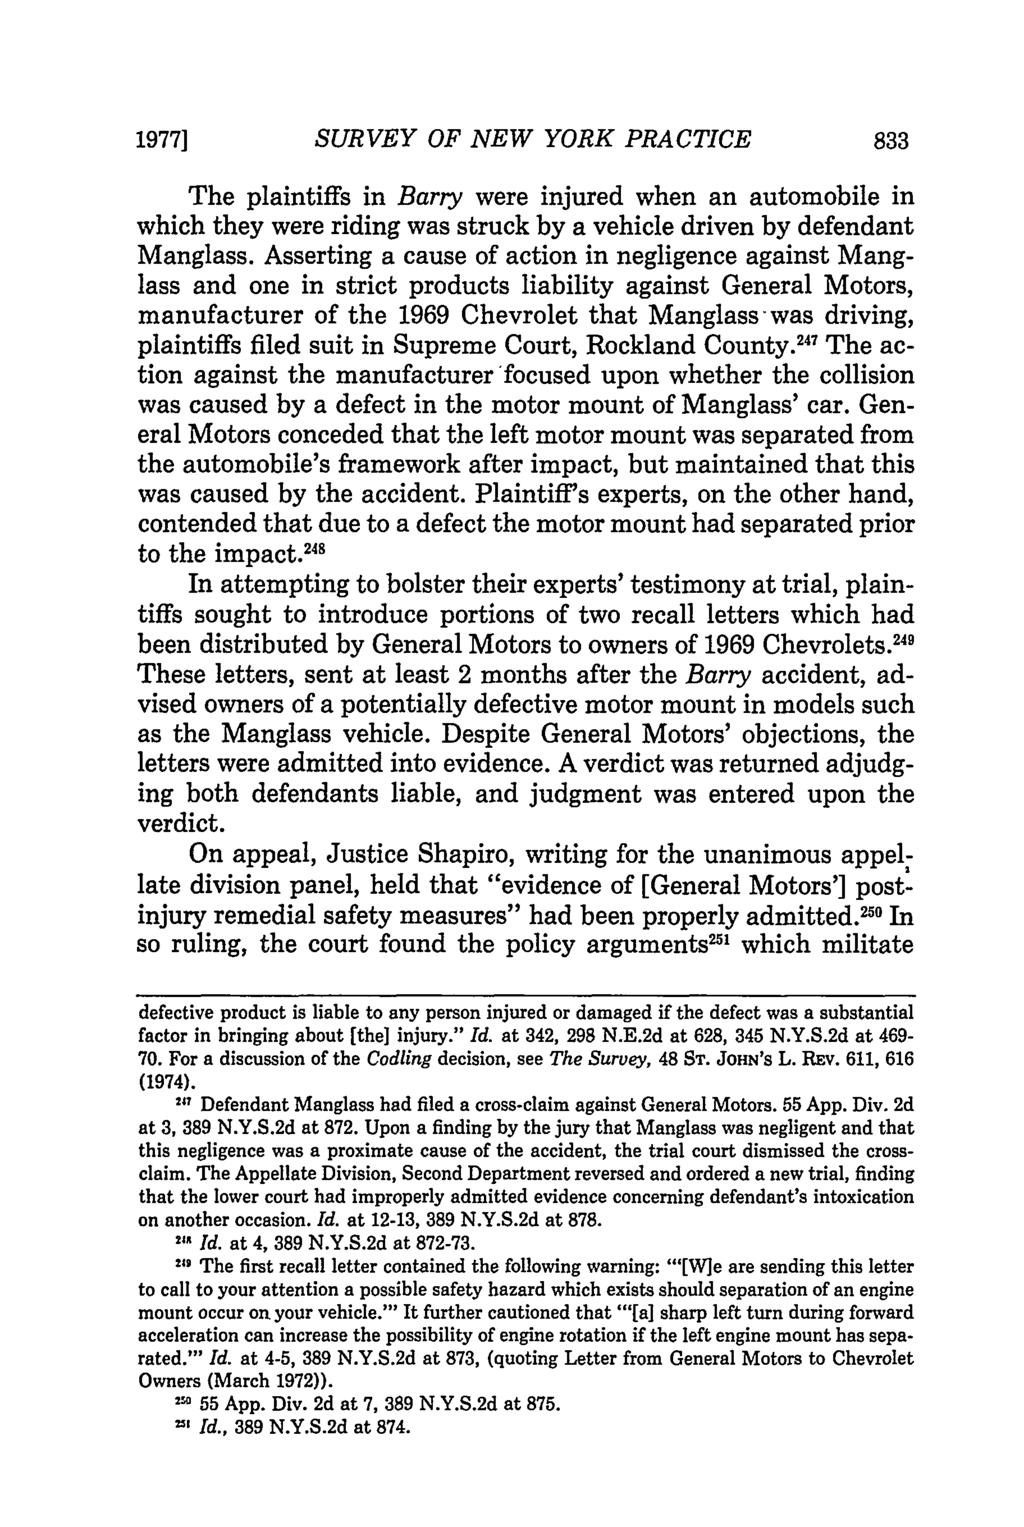 19771 SURVEY OF NEW YORK PRACTICE The plaintiffs in Barry were injured when an automobile in which they were riding was struck by a vehicle driven by defendant Manglass.